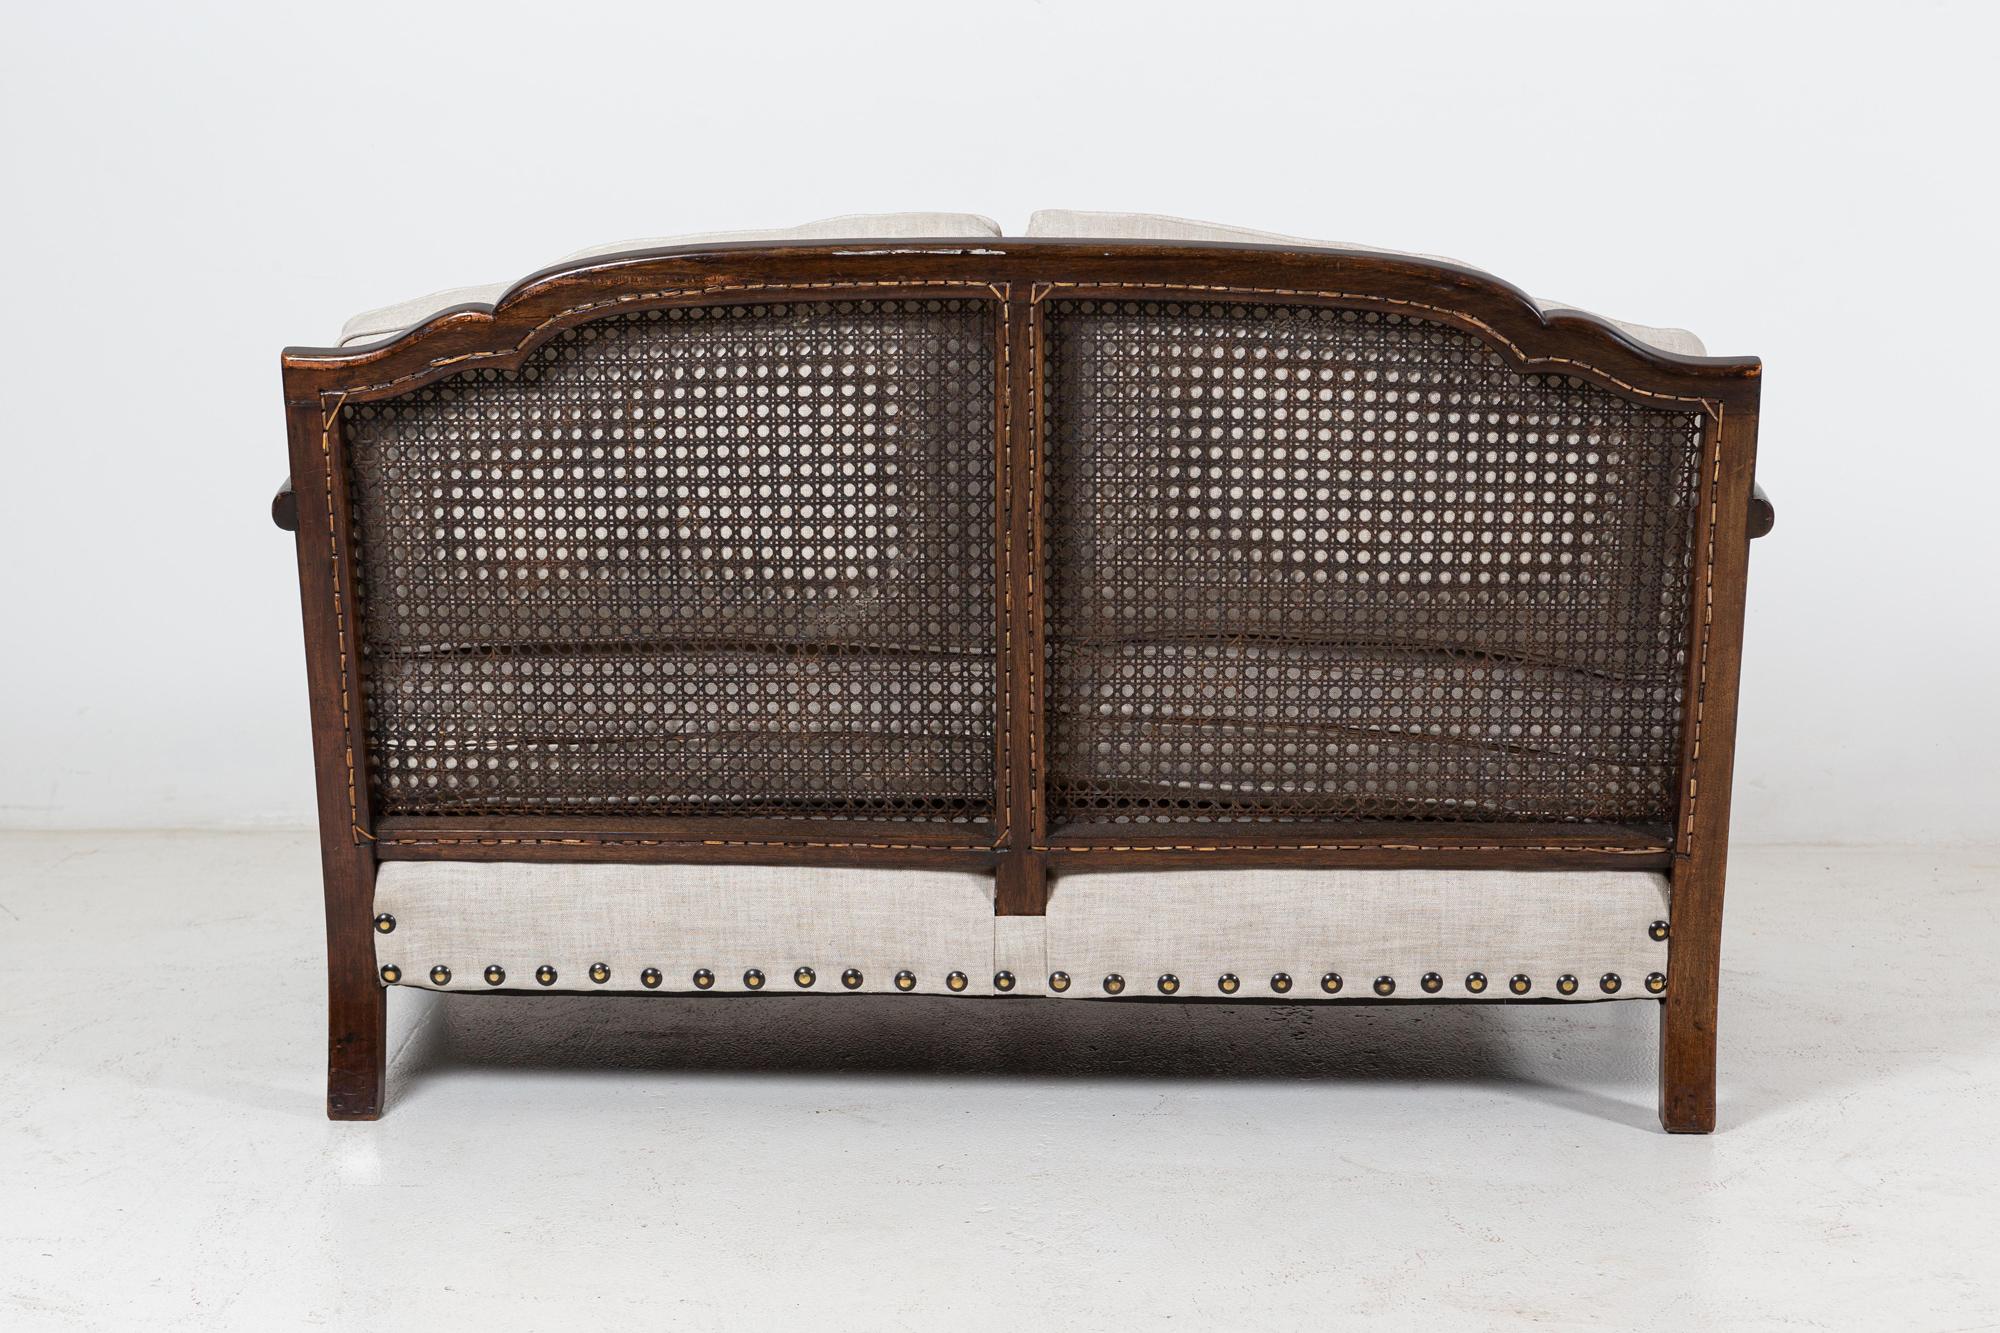 1930’s English Mahogany Bergere Suite In Good Condition For Sale In Staffordshire, GB